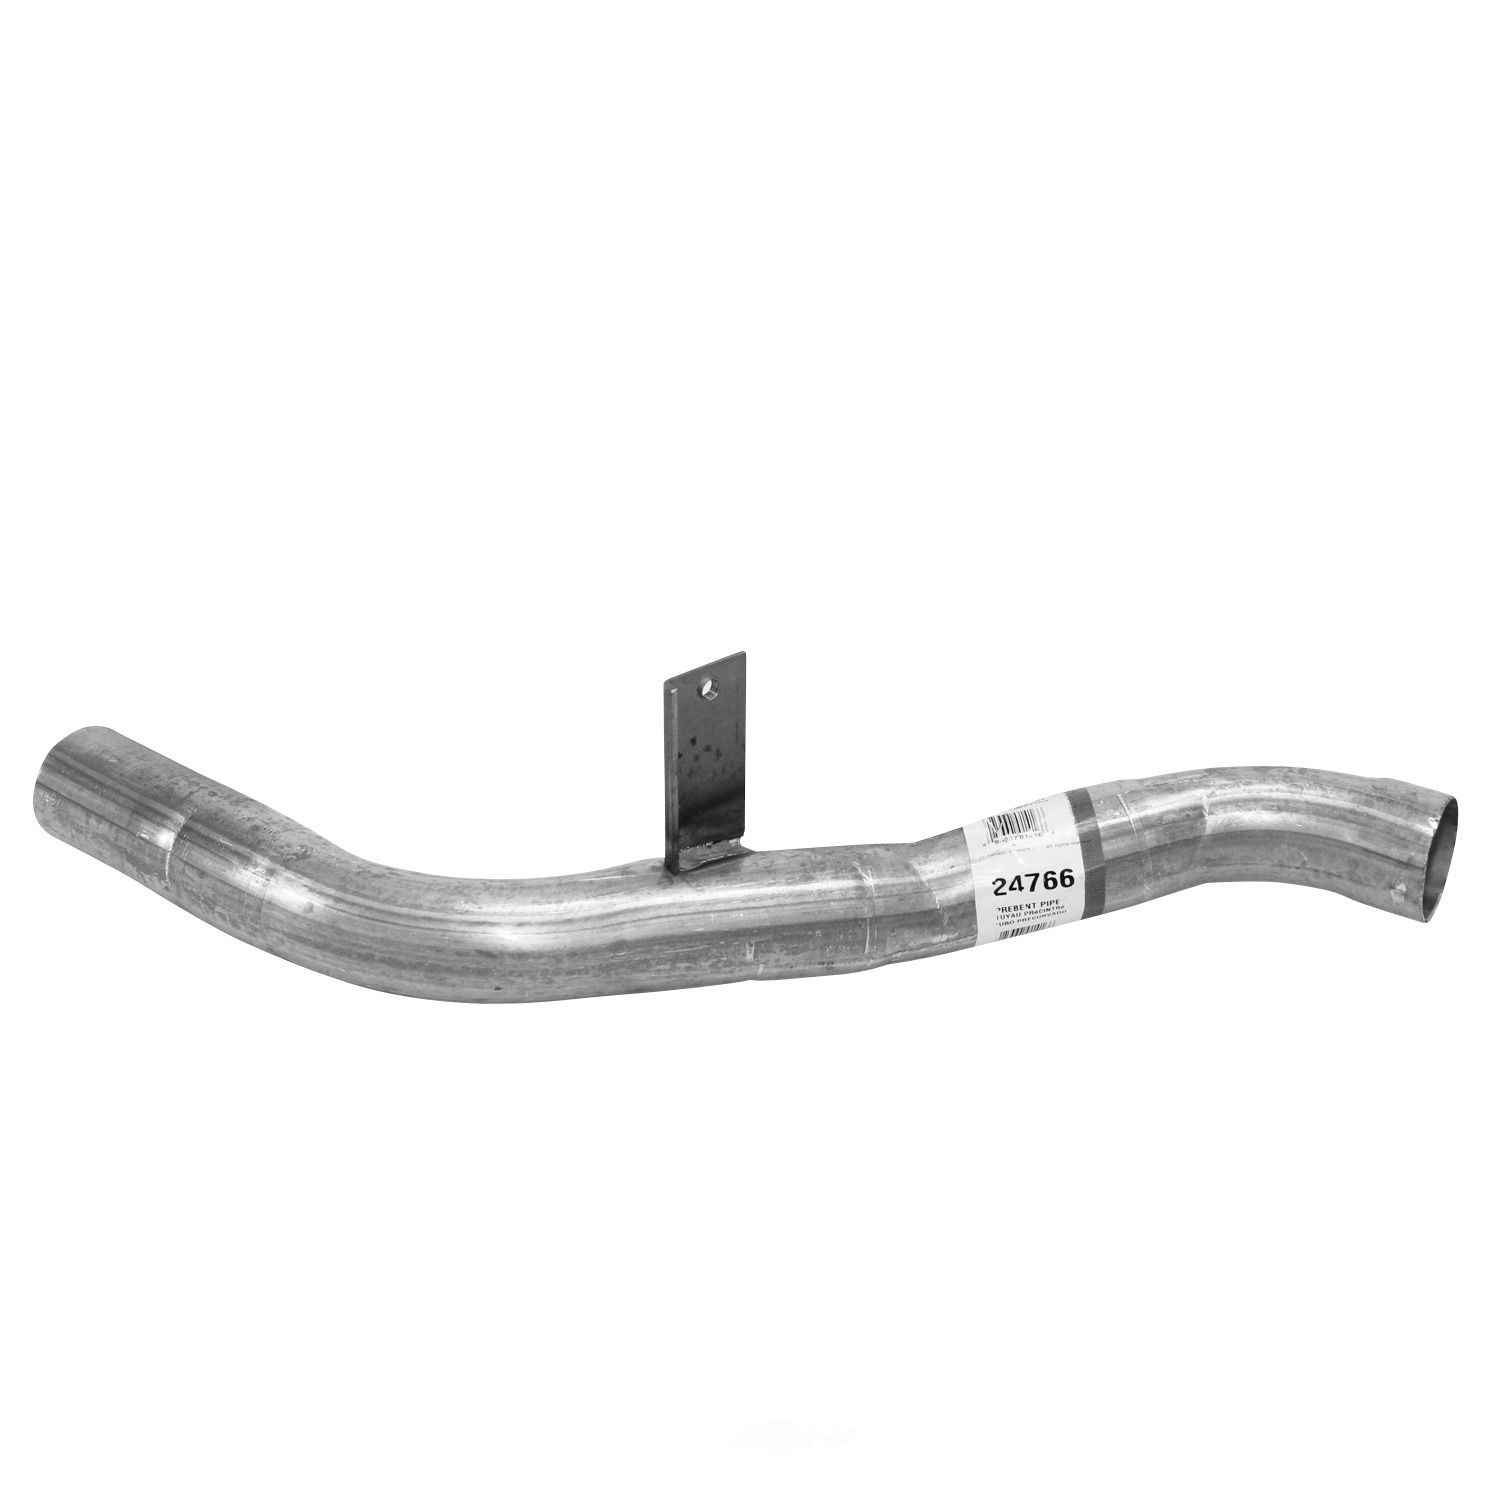 AP EXHAUST W/FEDERAL CONVERTER - Exhaust Tail Pipe - APF 24766